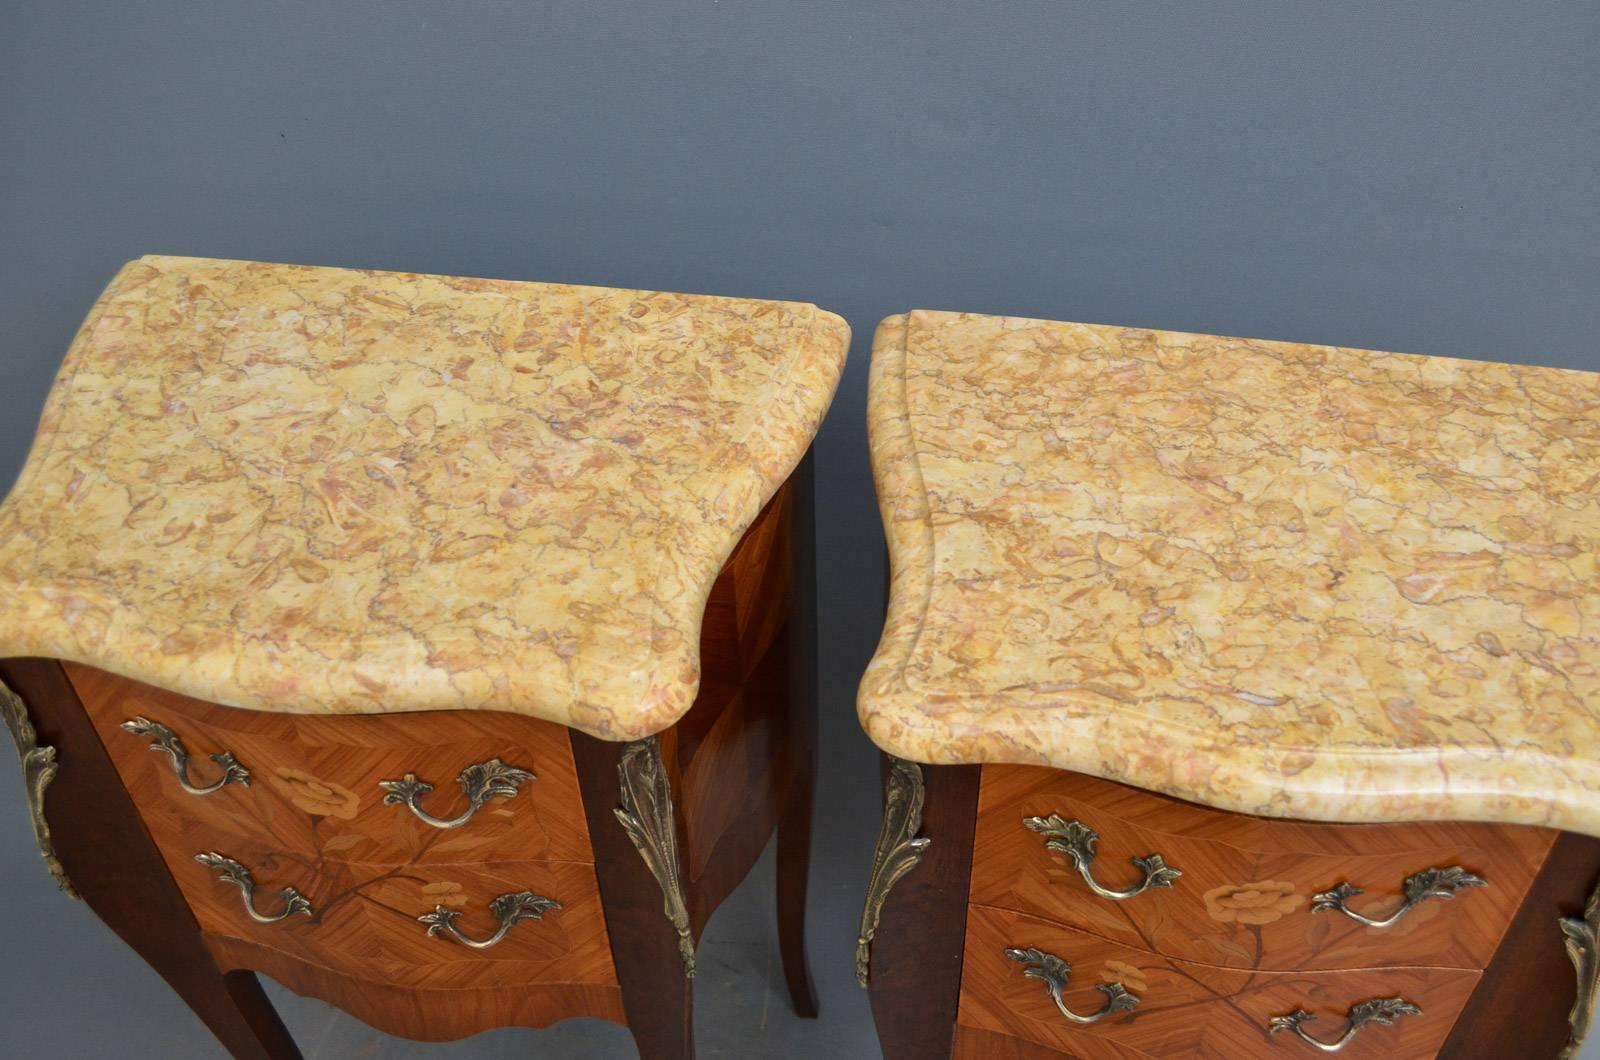 Sn3693, a pair of tulipwood night tables, having serpentine marble tops above two flower inlaid drawers fitted with original brass handles and flanked by ormolu decoration, all standing on slender cabriole legs with brass sabots. This antique pair